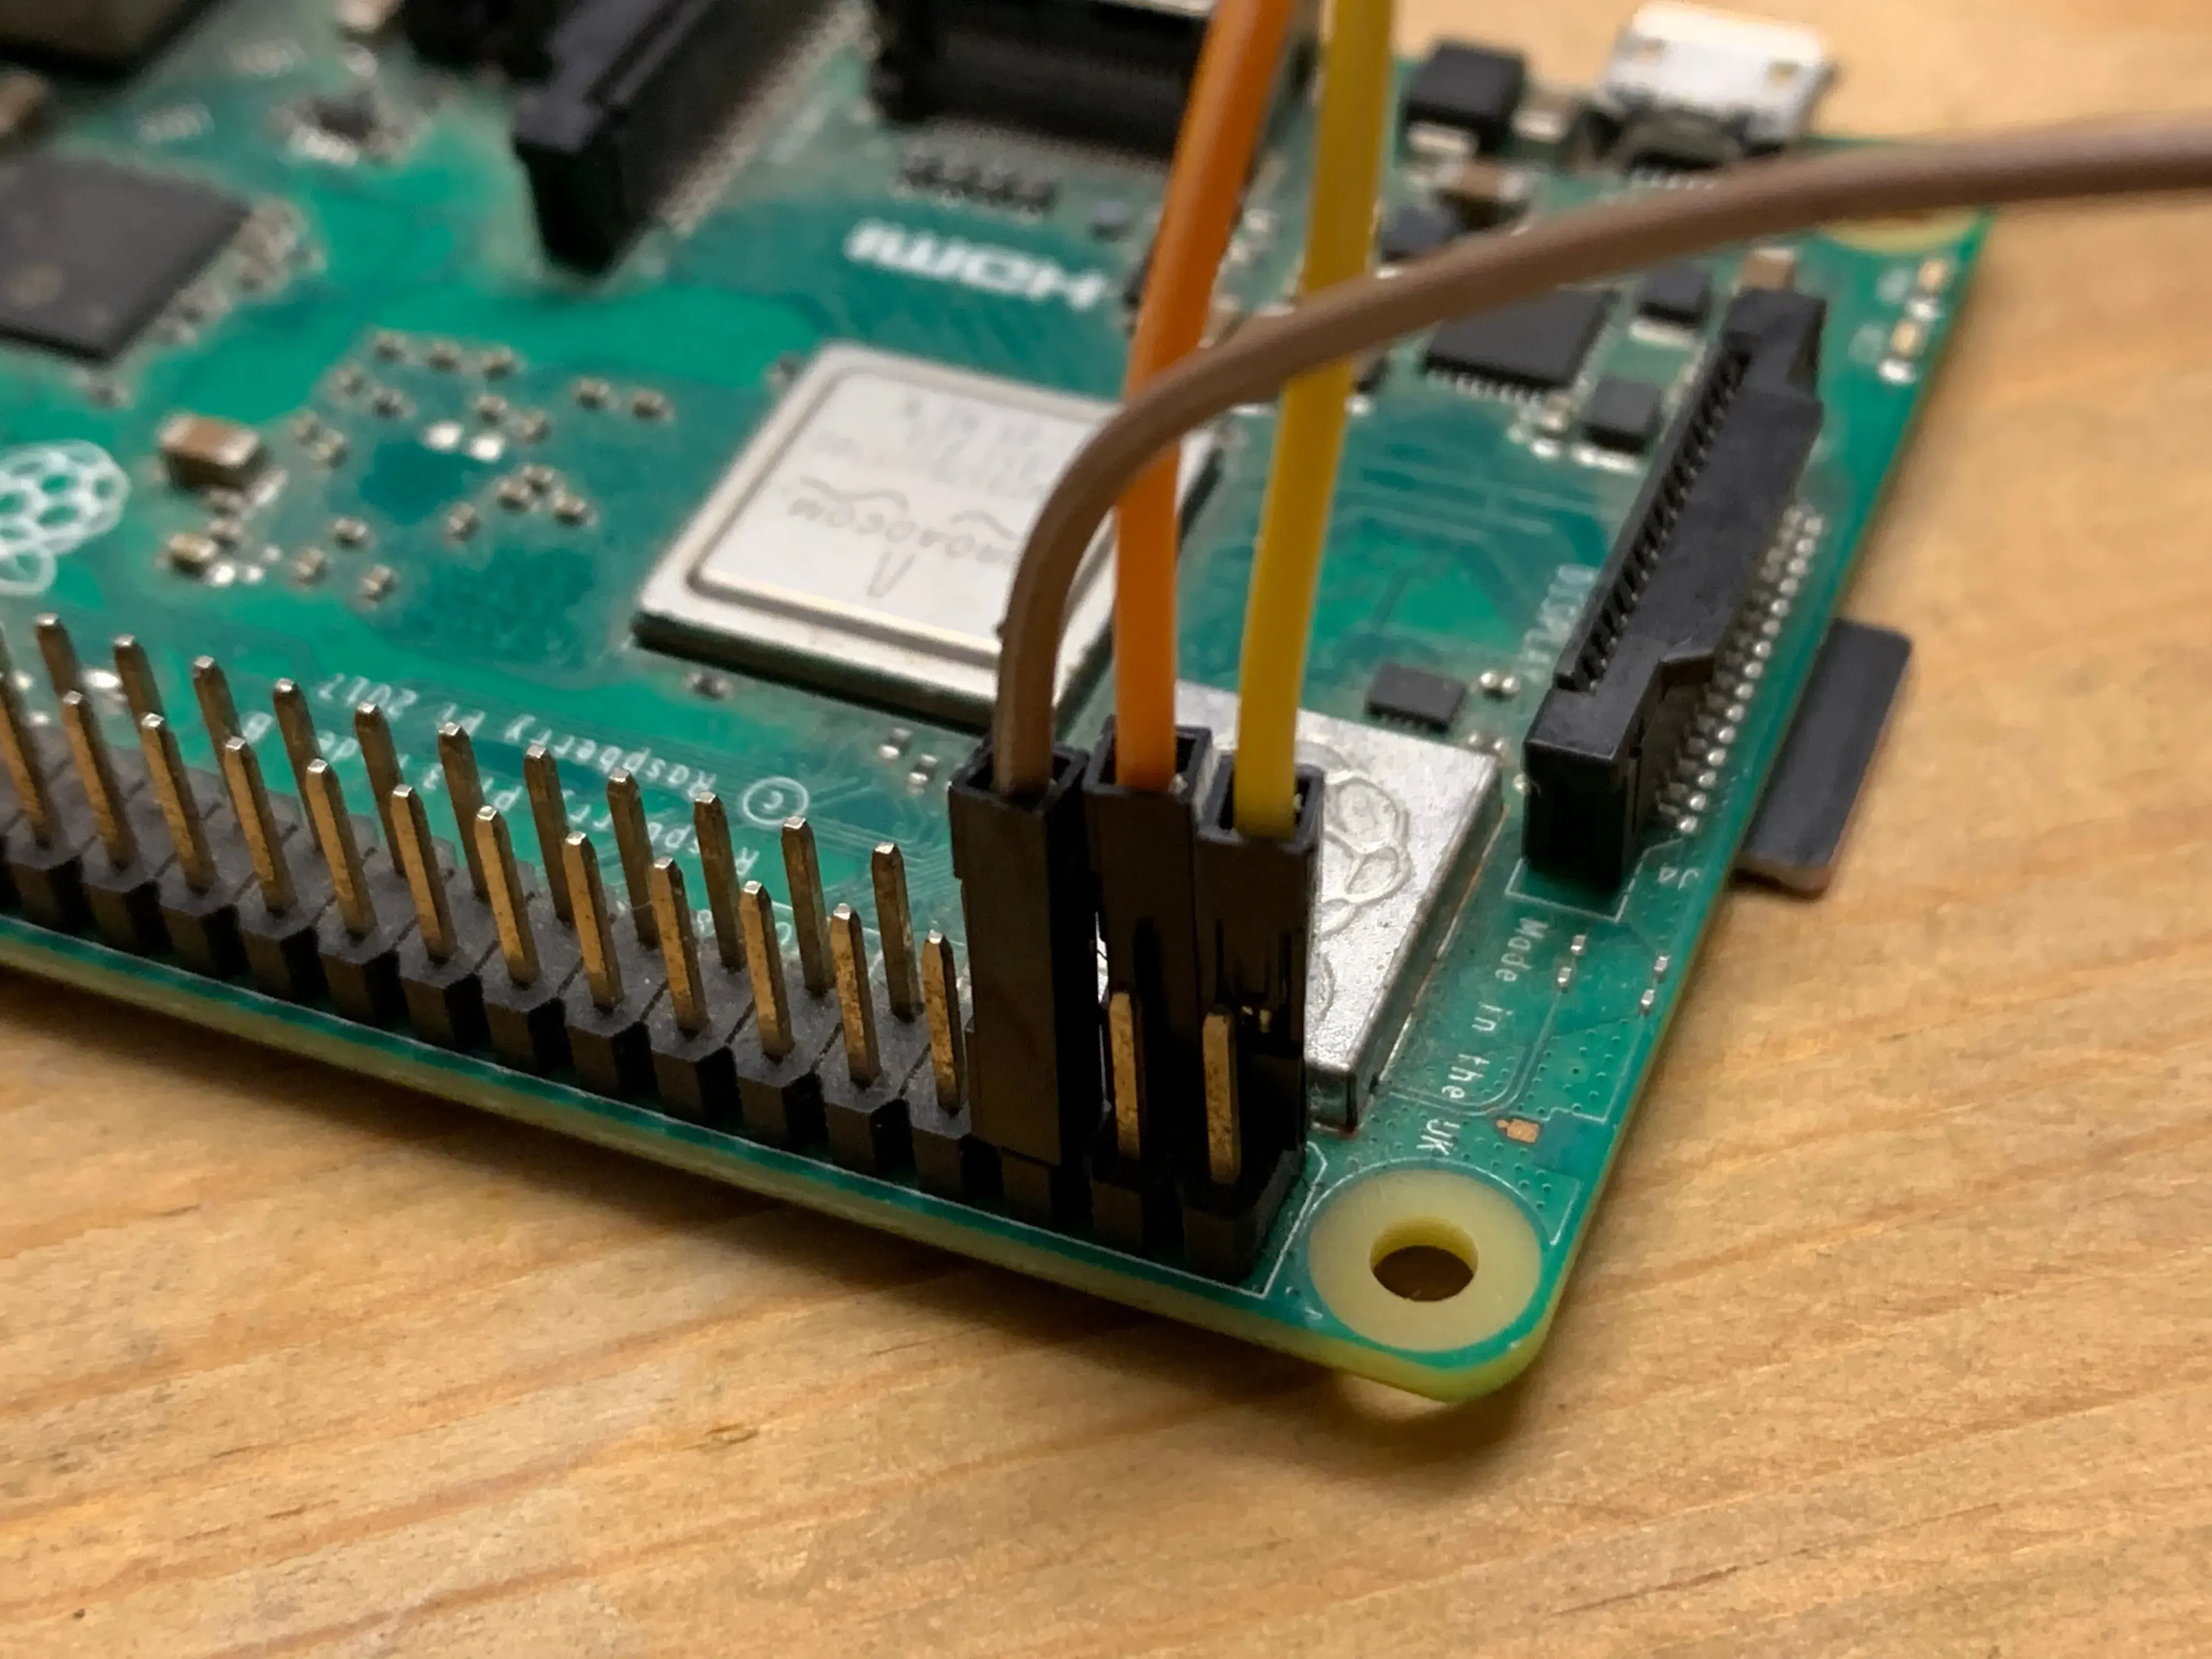 Simple GPIO connections to the Pi